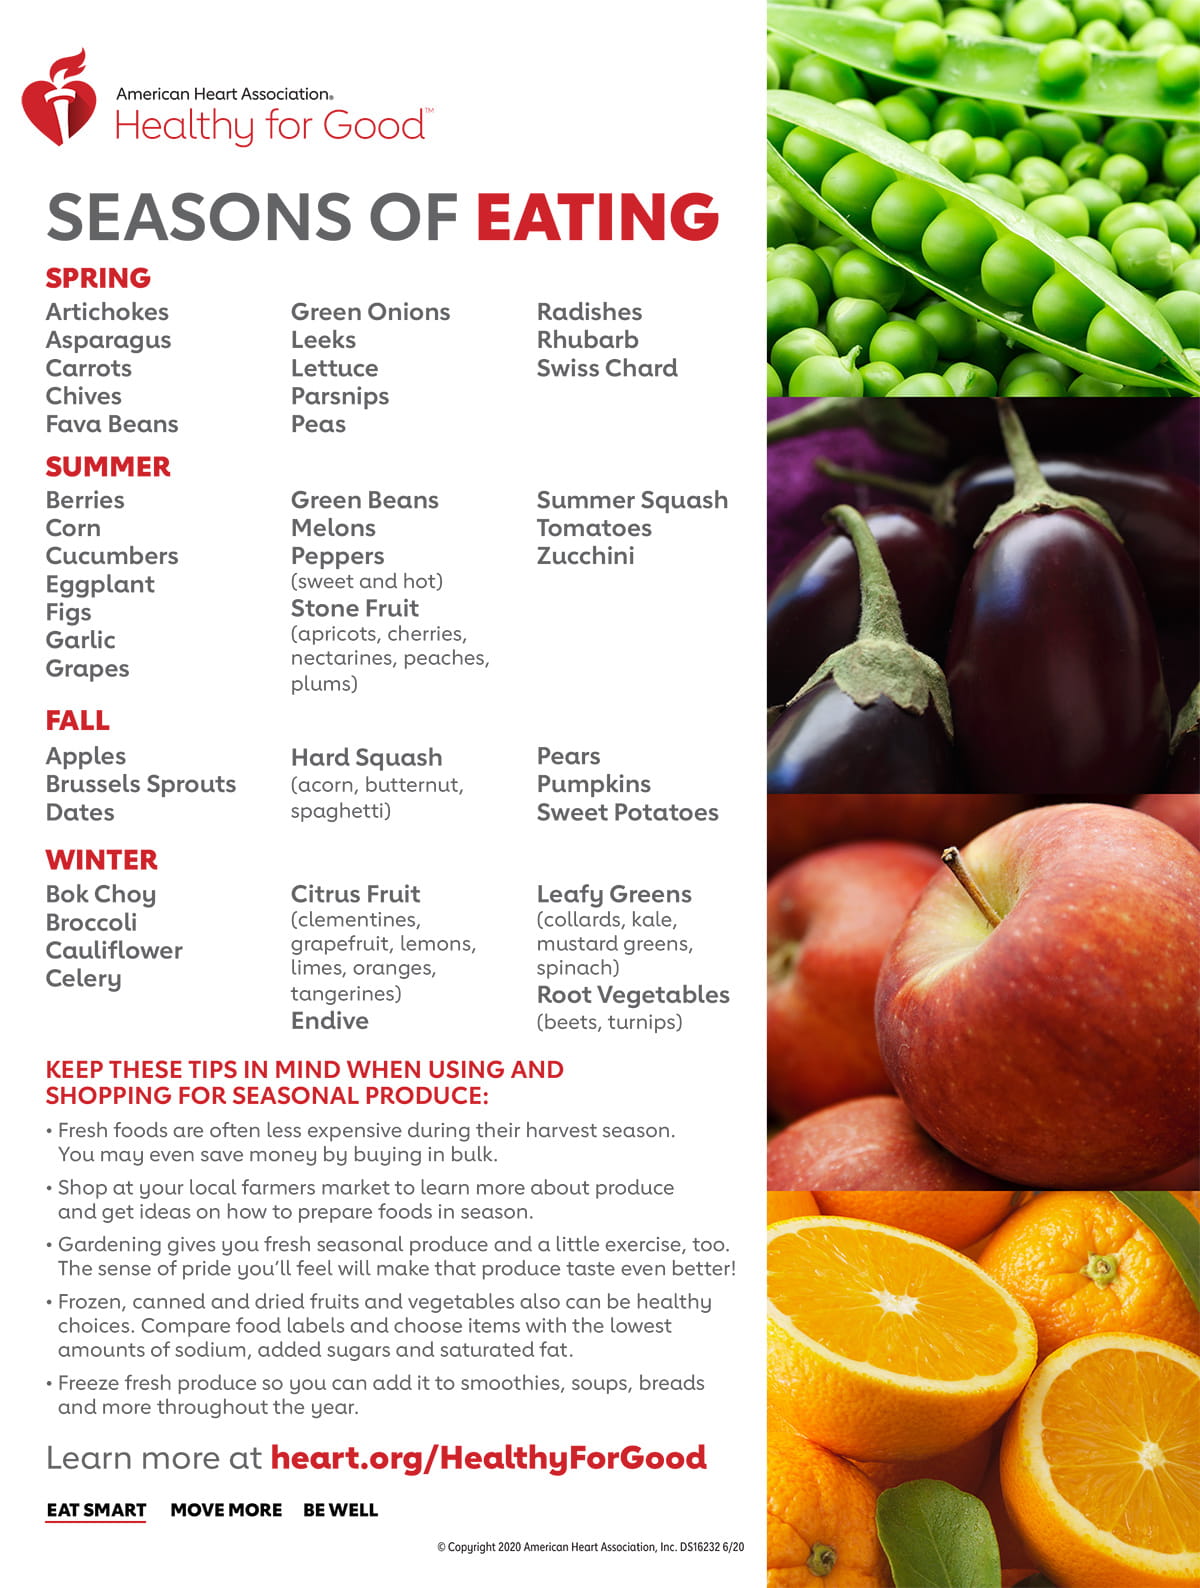 Seasons of Eating Infographic